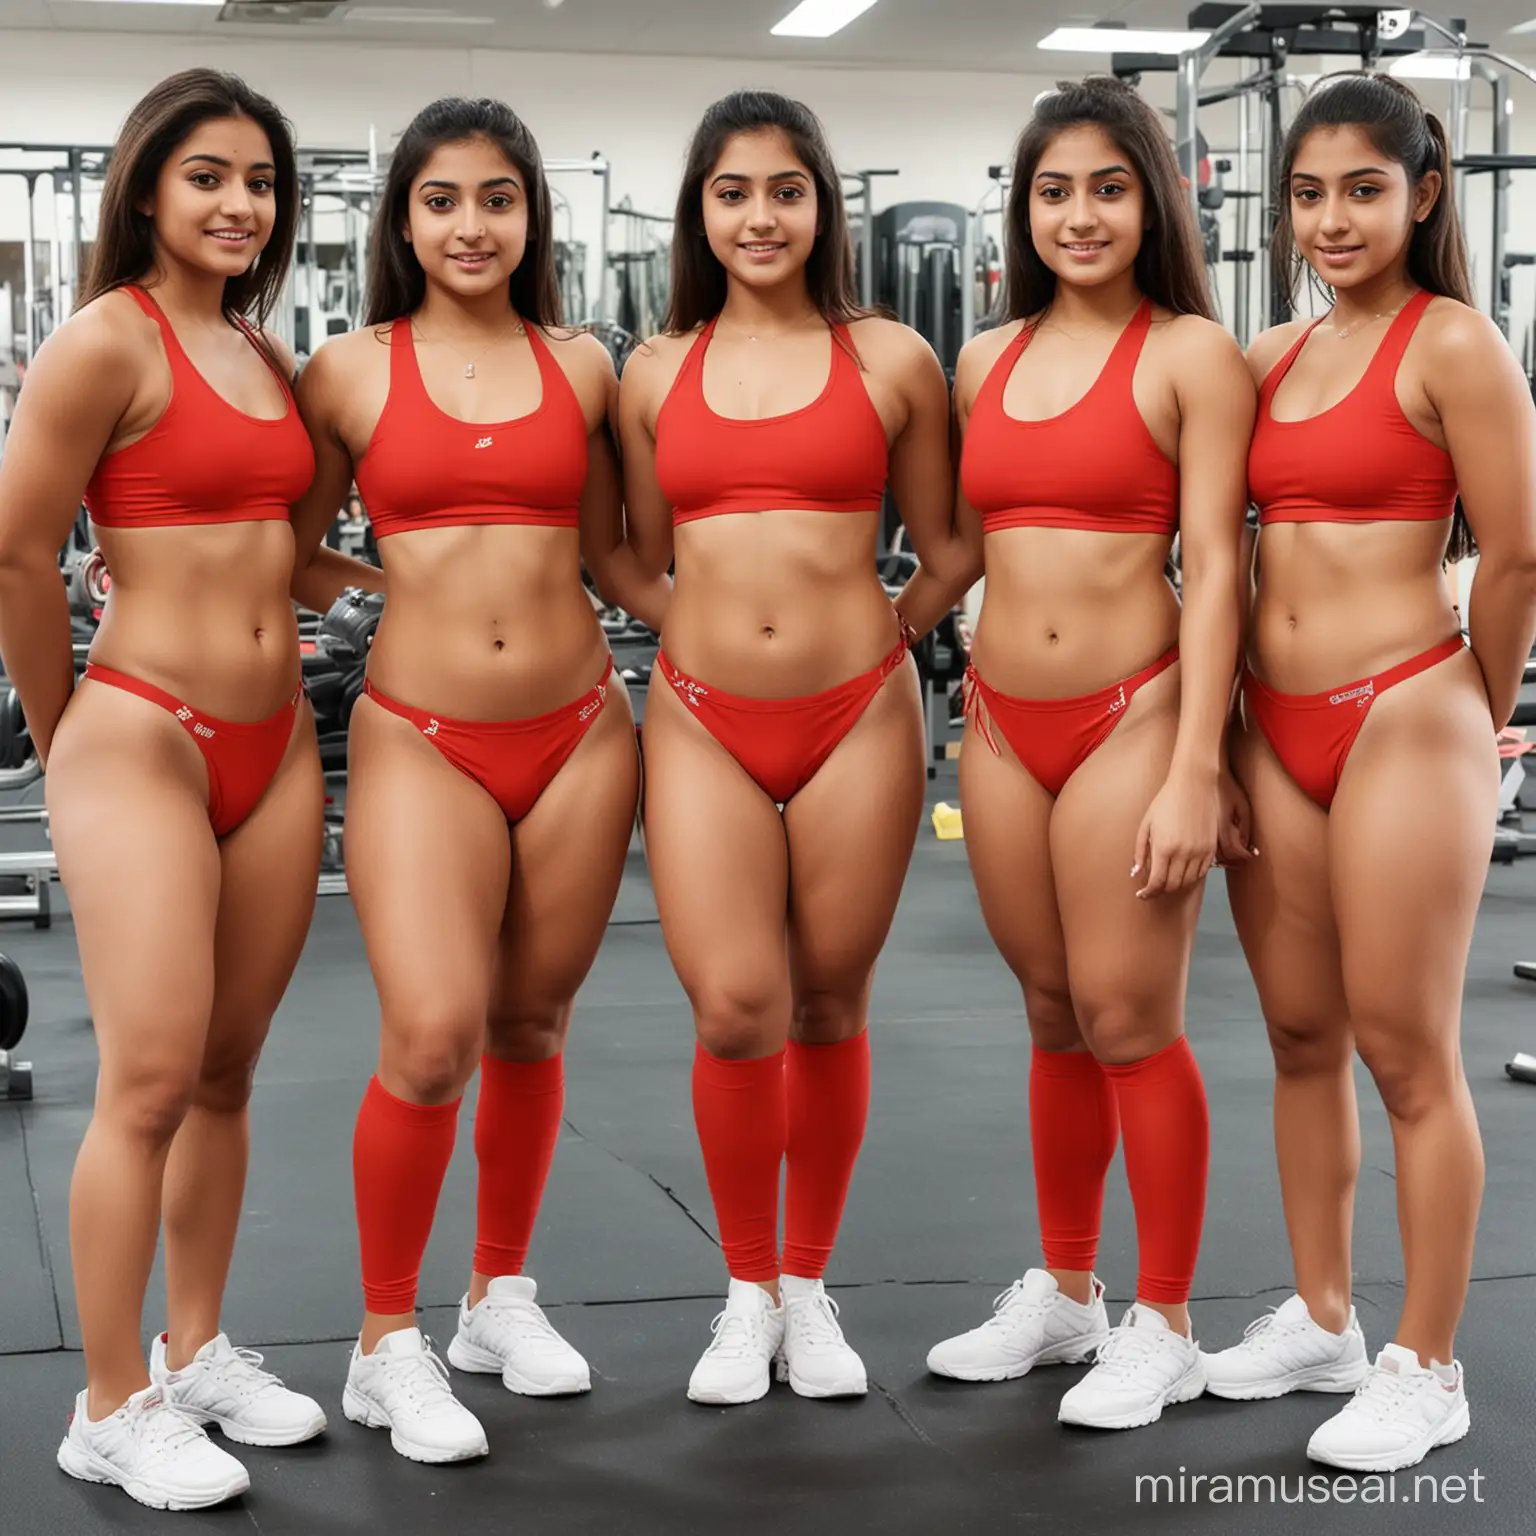 Group of Grade 11 Indian Girls Wearing Red GString Leotards in Gym